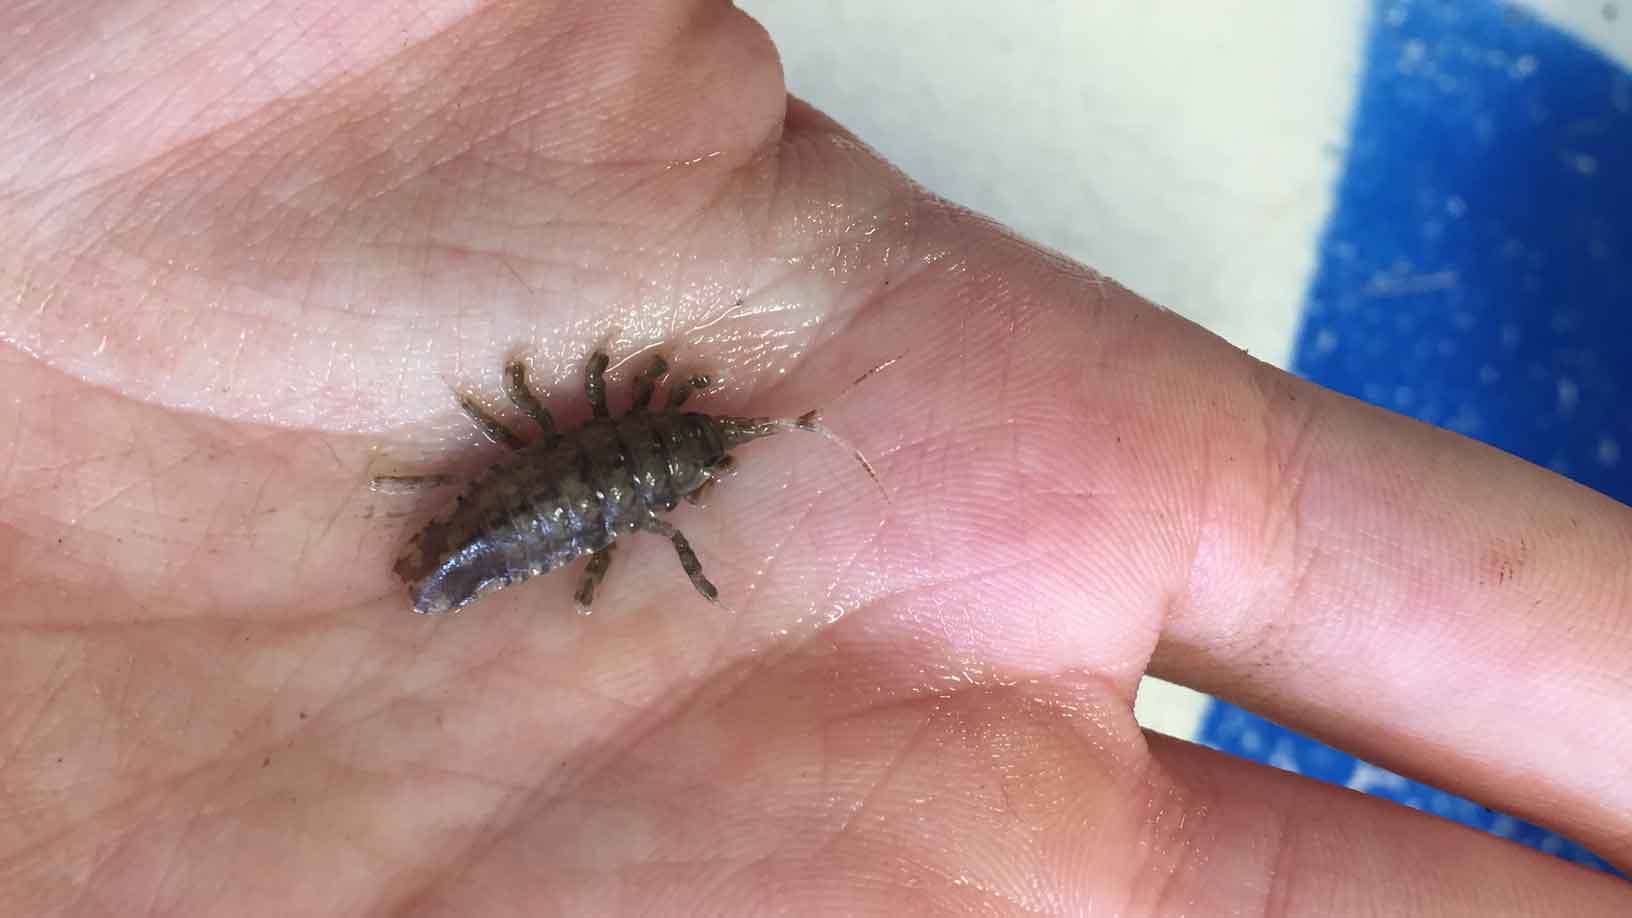 A small isopod, a bug with eight legs sitting on a hand